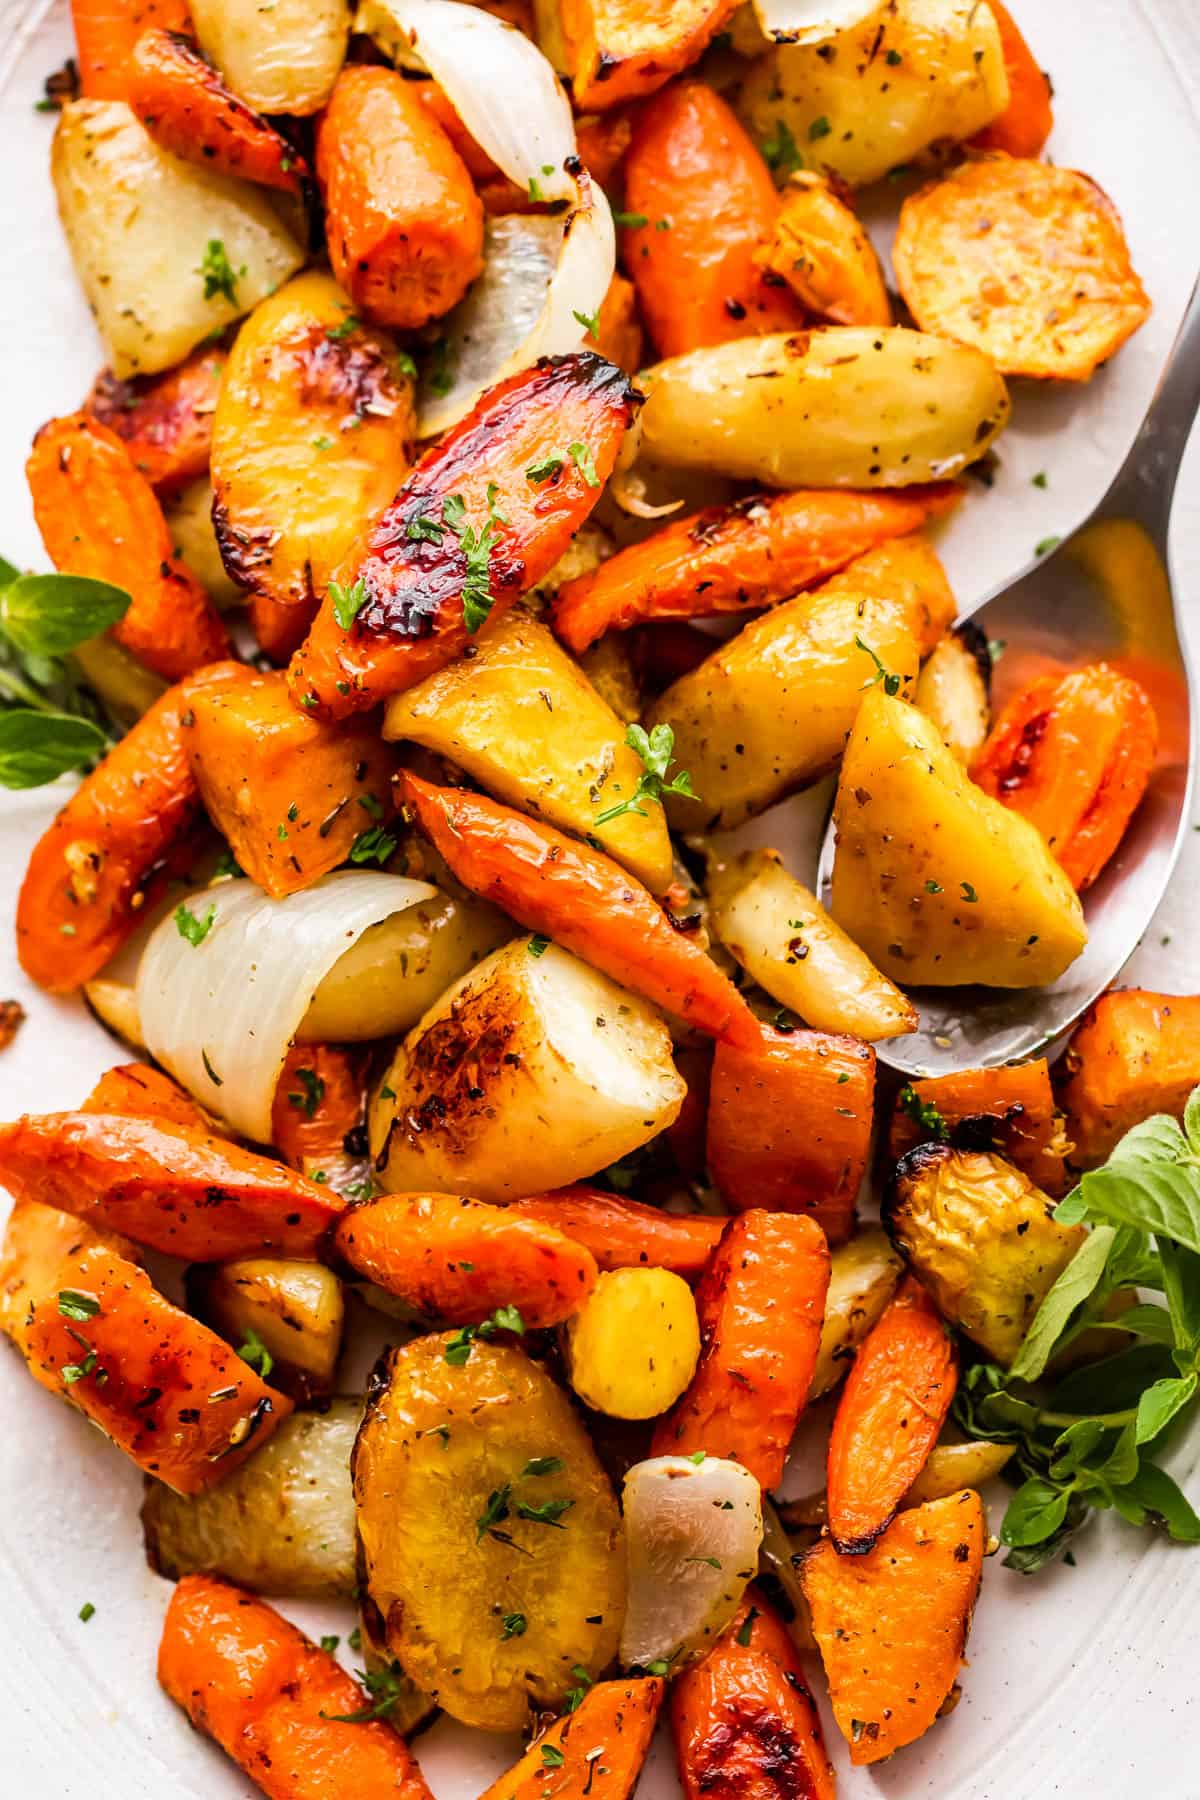 Roasted sweet potatoes and carrots